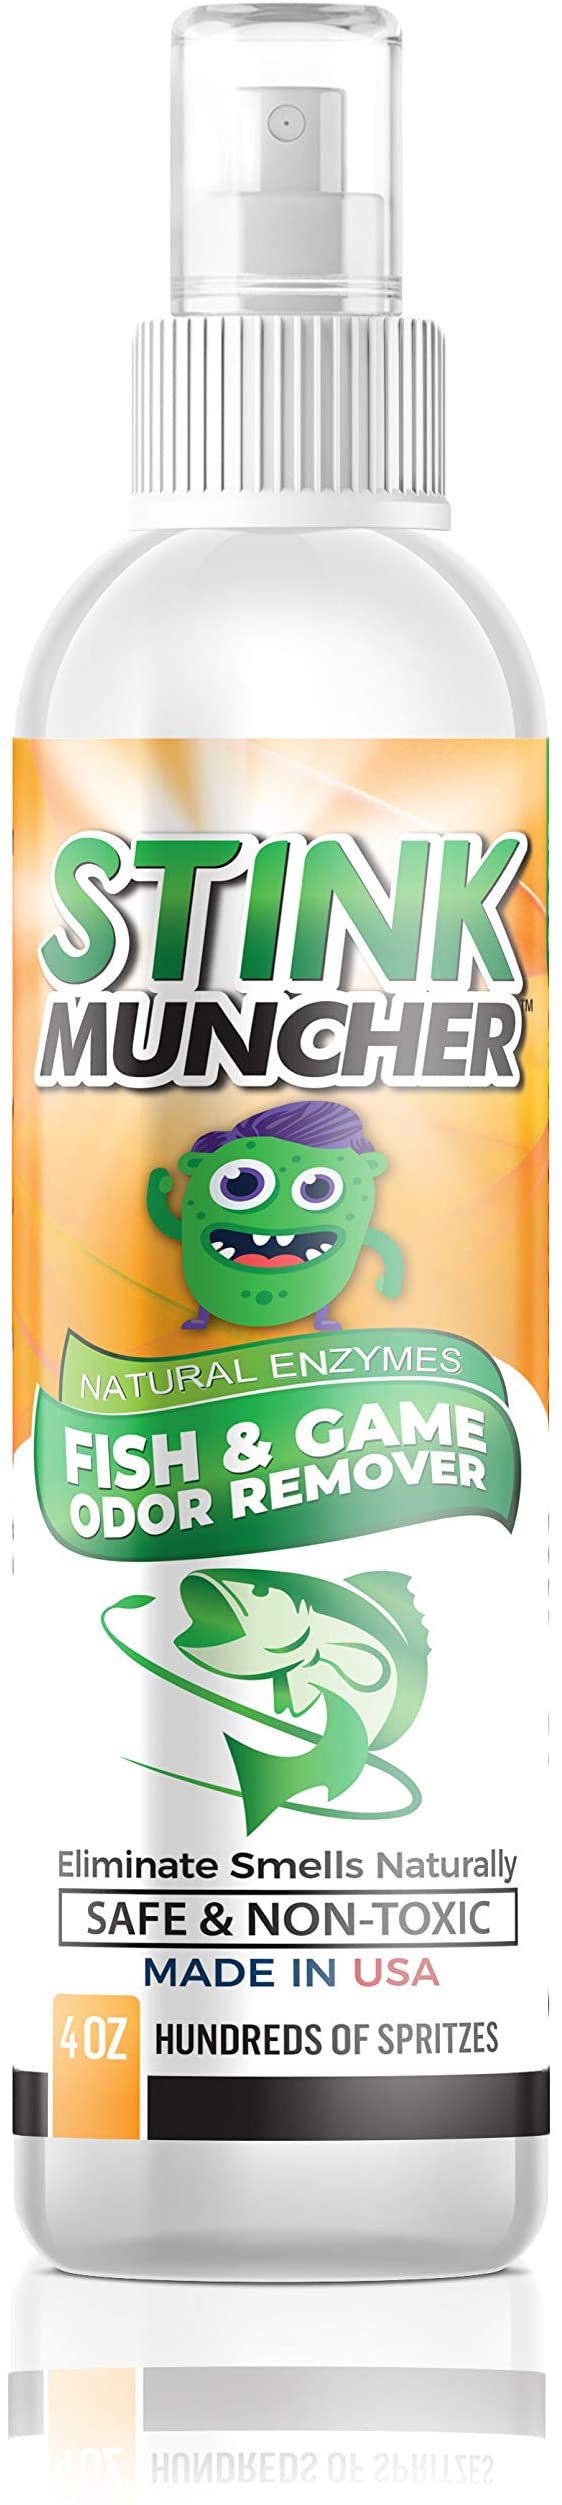 Life Miracle Stink Muncher Fish and Game Natural Enzyme Odor Eliminator and Remover Spray | Smell Proof Your Fishing, Hunting and Sports Clothing, Shoes and Equipment | Made in USA